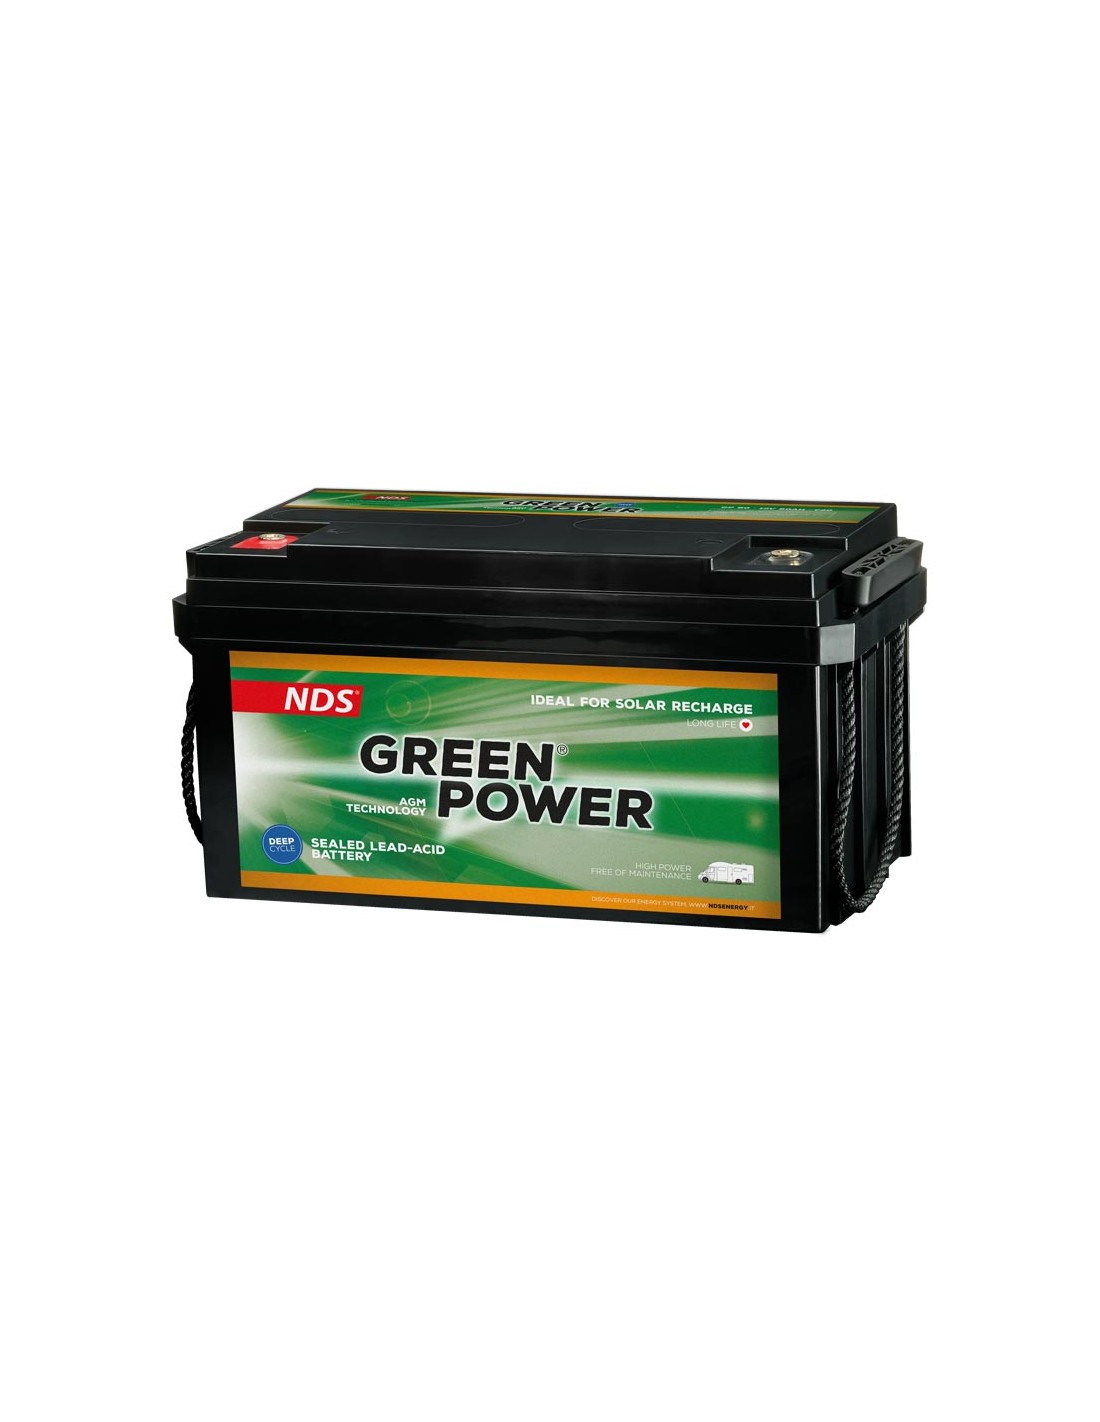 https://www.puntoenergiashop.it/42685-thickbox_default/agm-80ah-12v-battery-nds-dometic-green-power-photovoltaic-storage-camper-boating.jpg